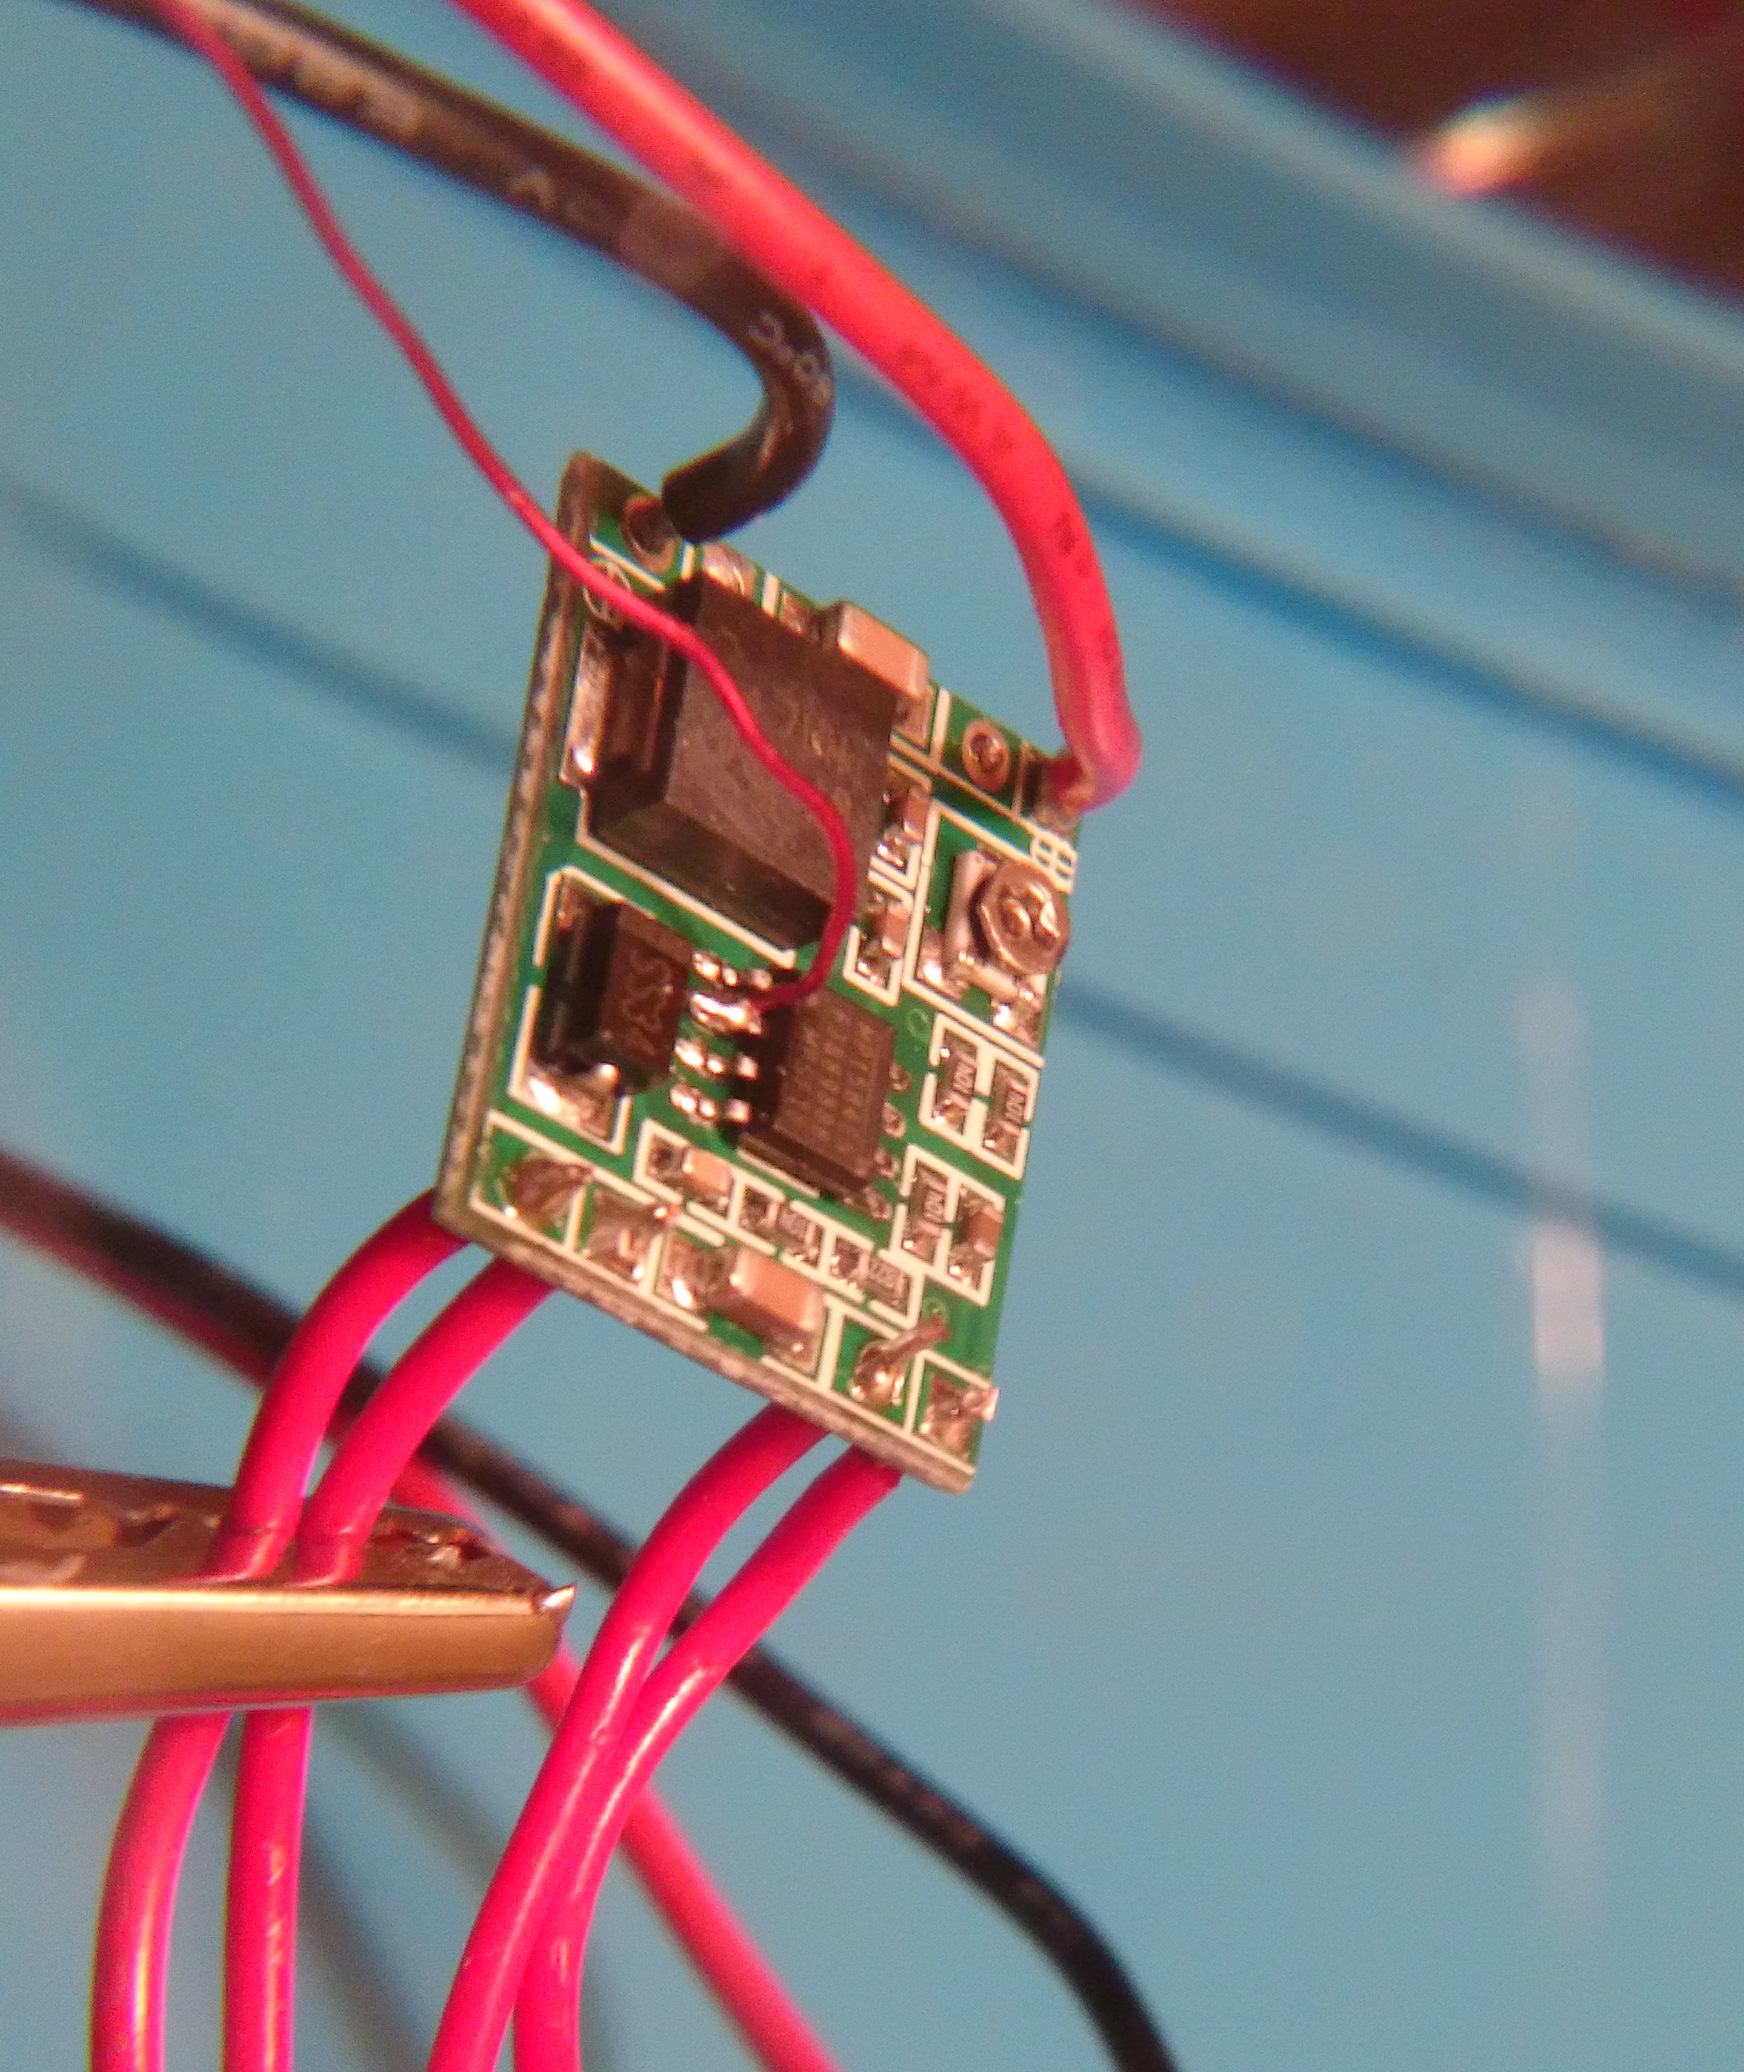 Enamel wire soldered to pin 2 of the MP1584 on the DC regulator board